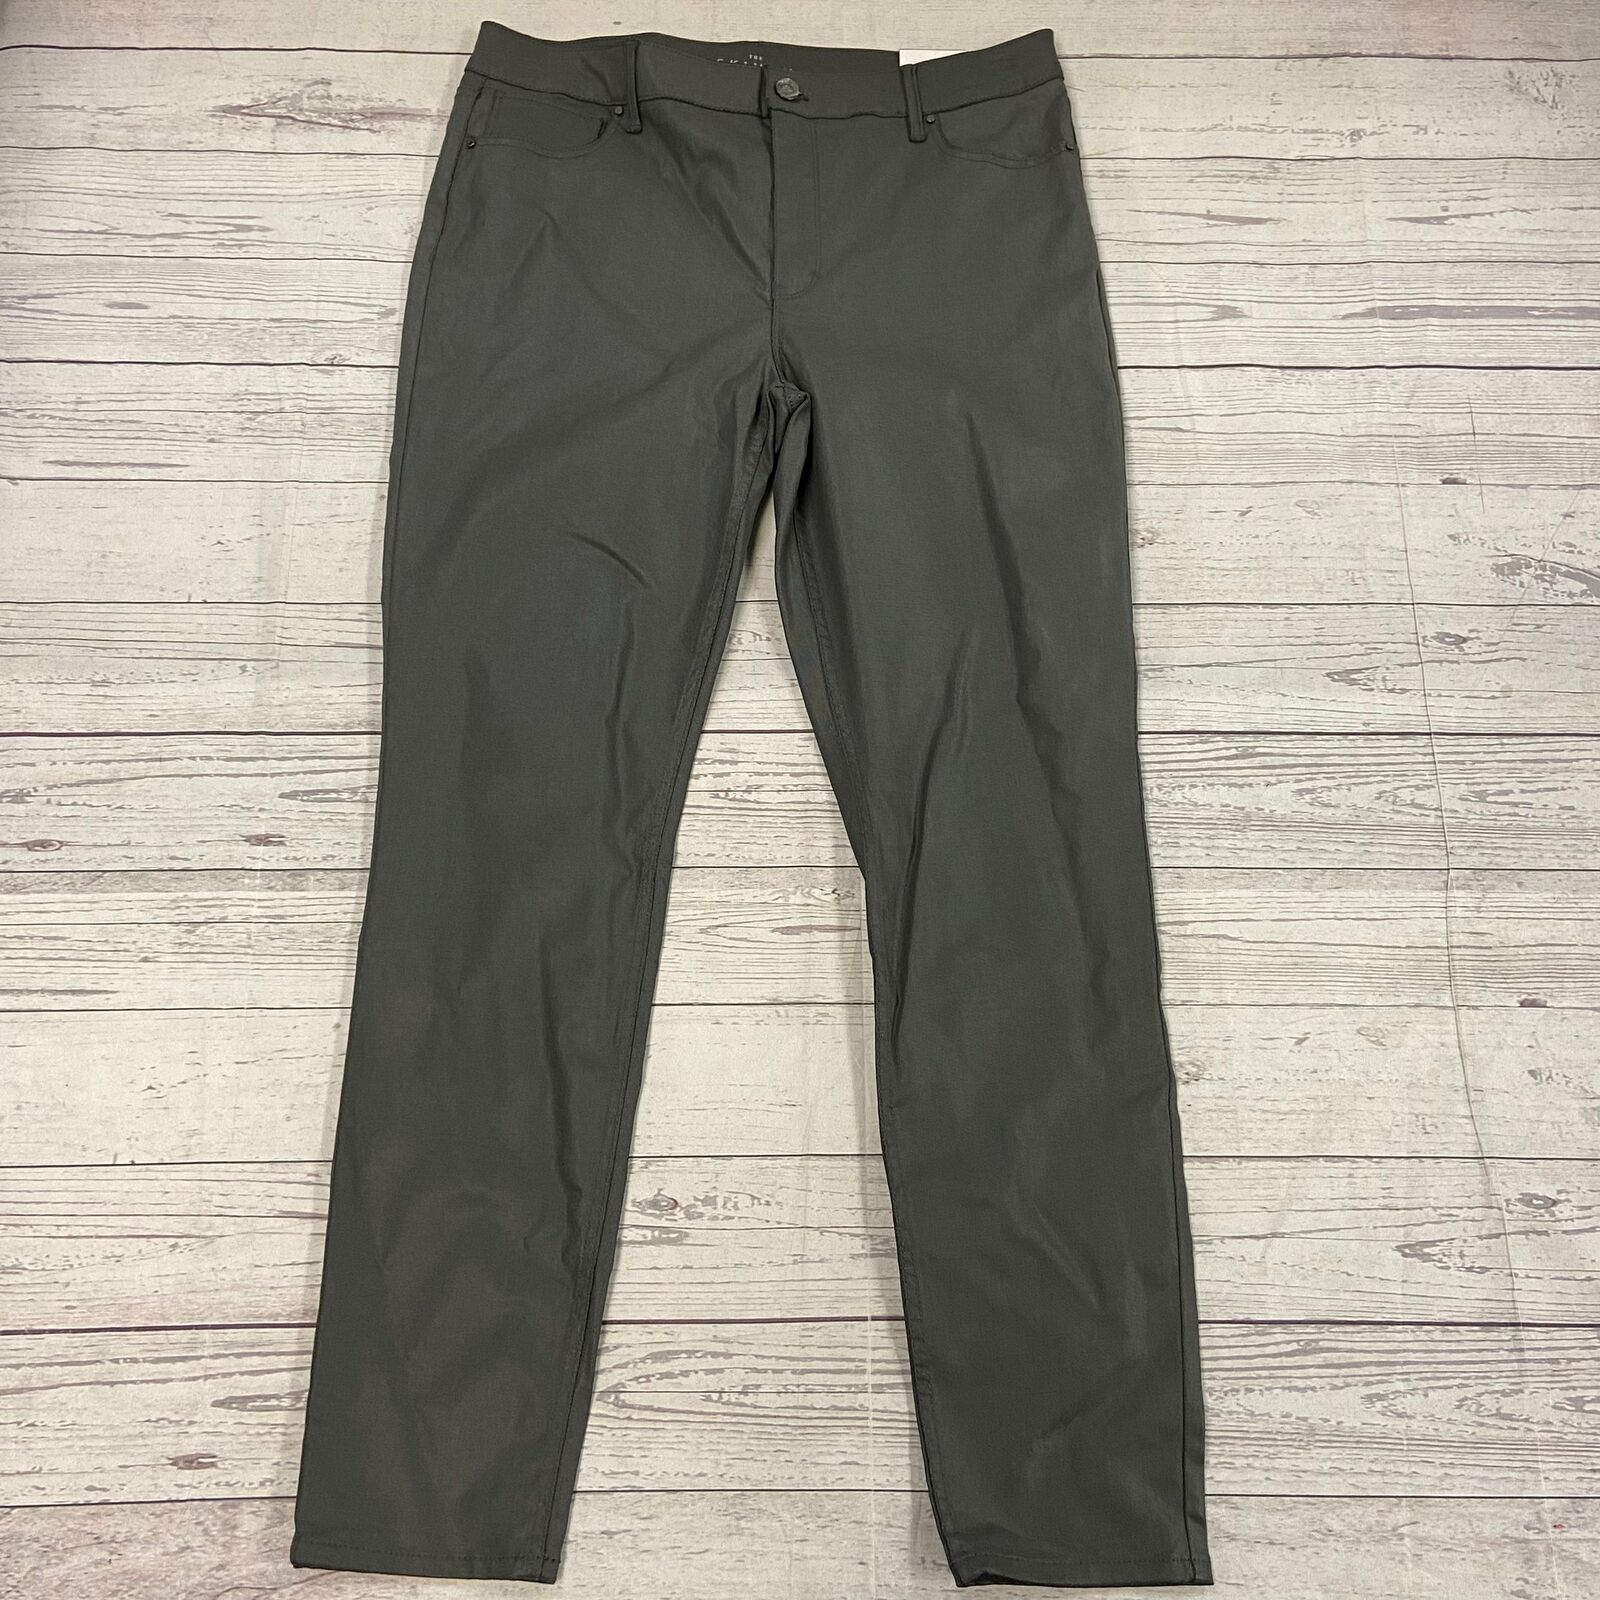 White House Black Market Gray Coated Pants Skinny Ankle Woman's